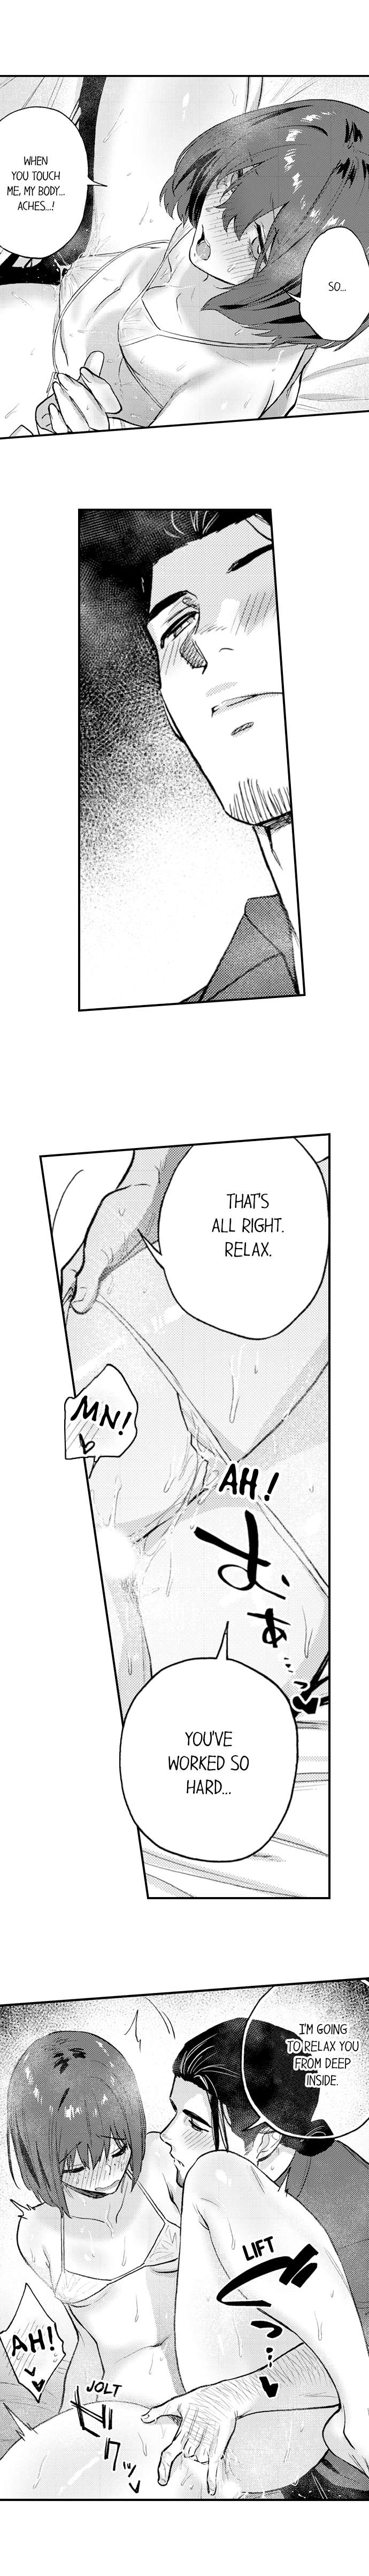 The Massage ♂♀ The Pleasure of Full Course Sex Chapter 1 - Page 7